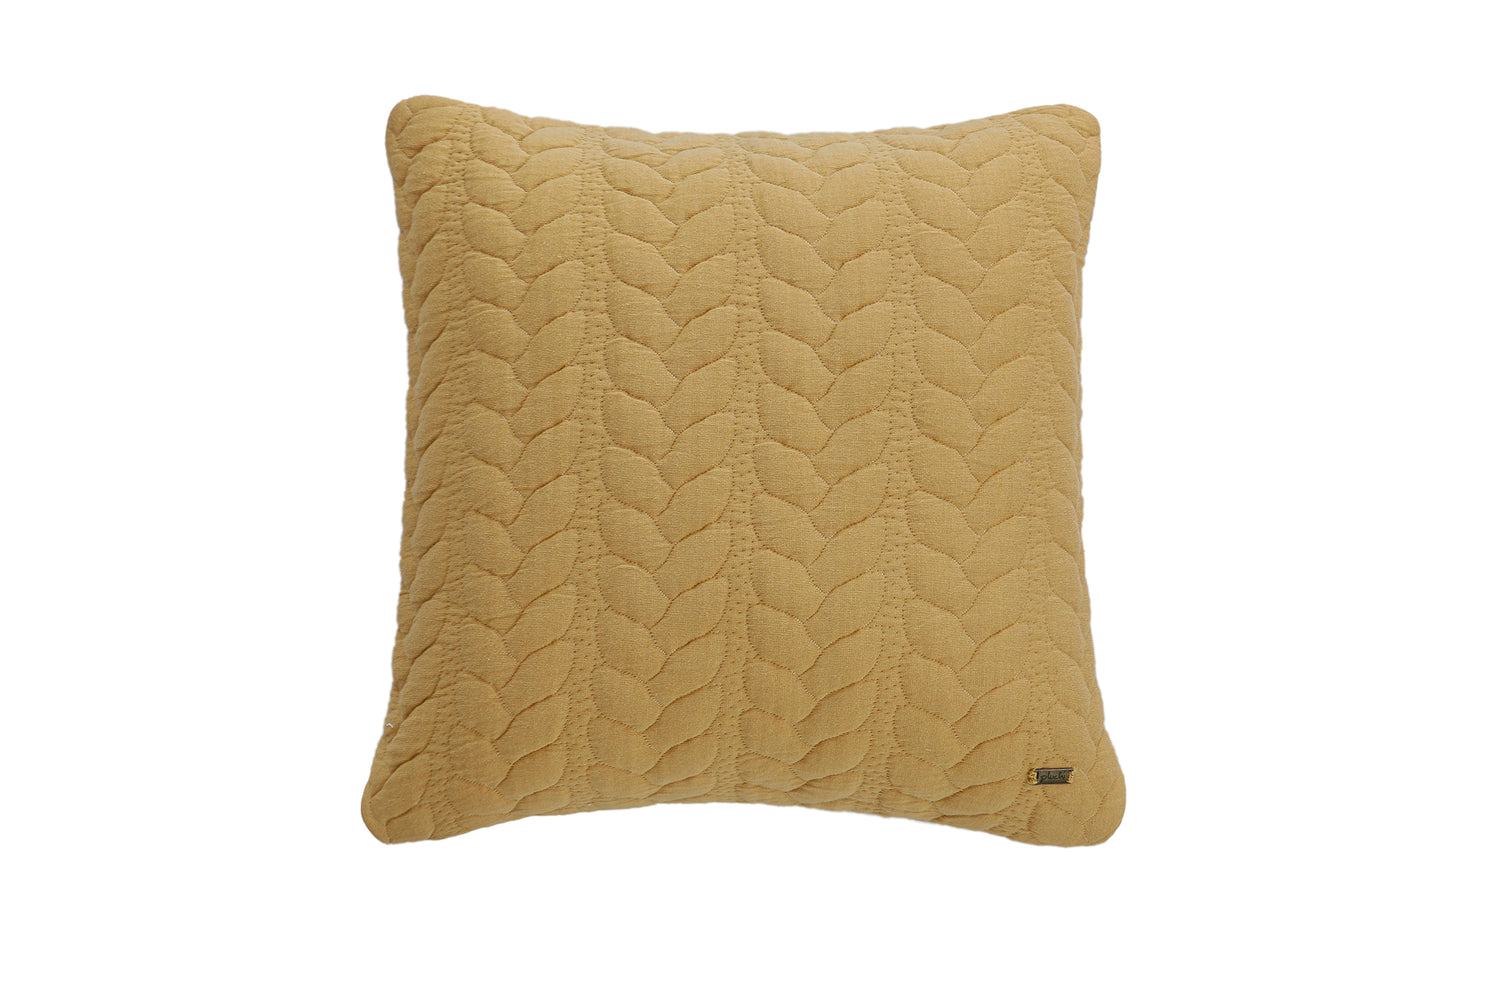 Leaf - Cotton Knitted Decorative Cushion Cover